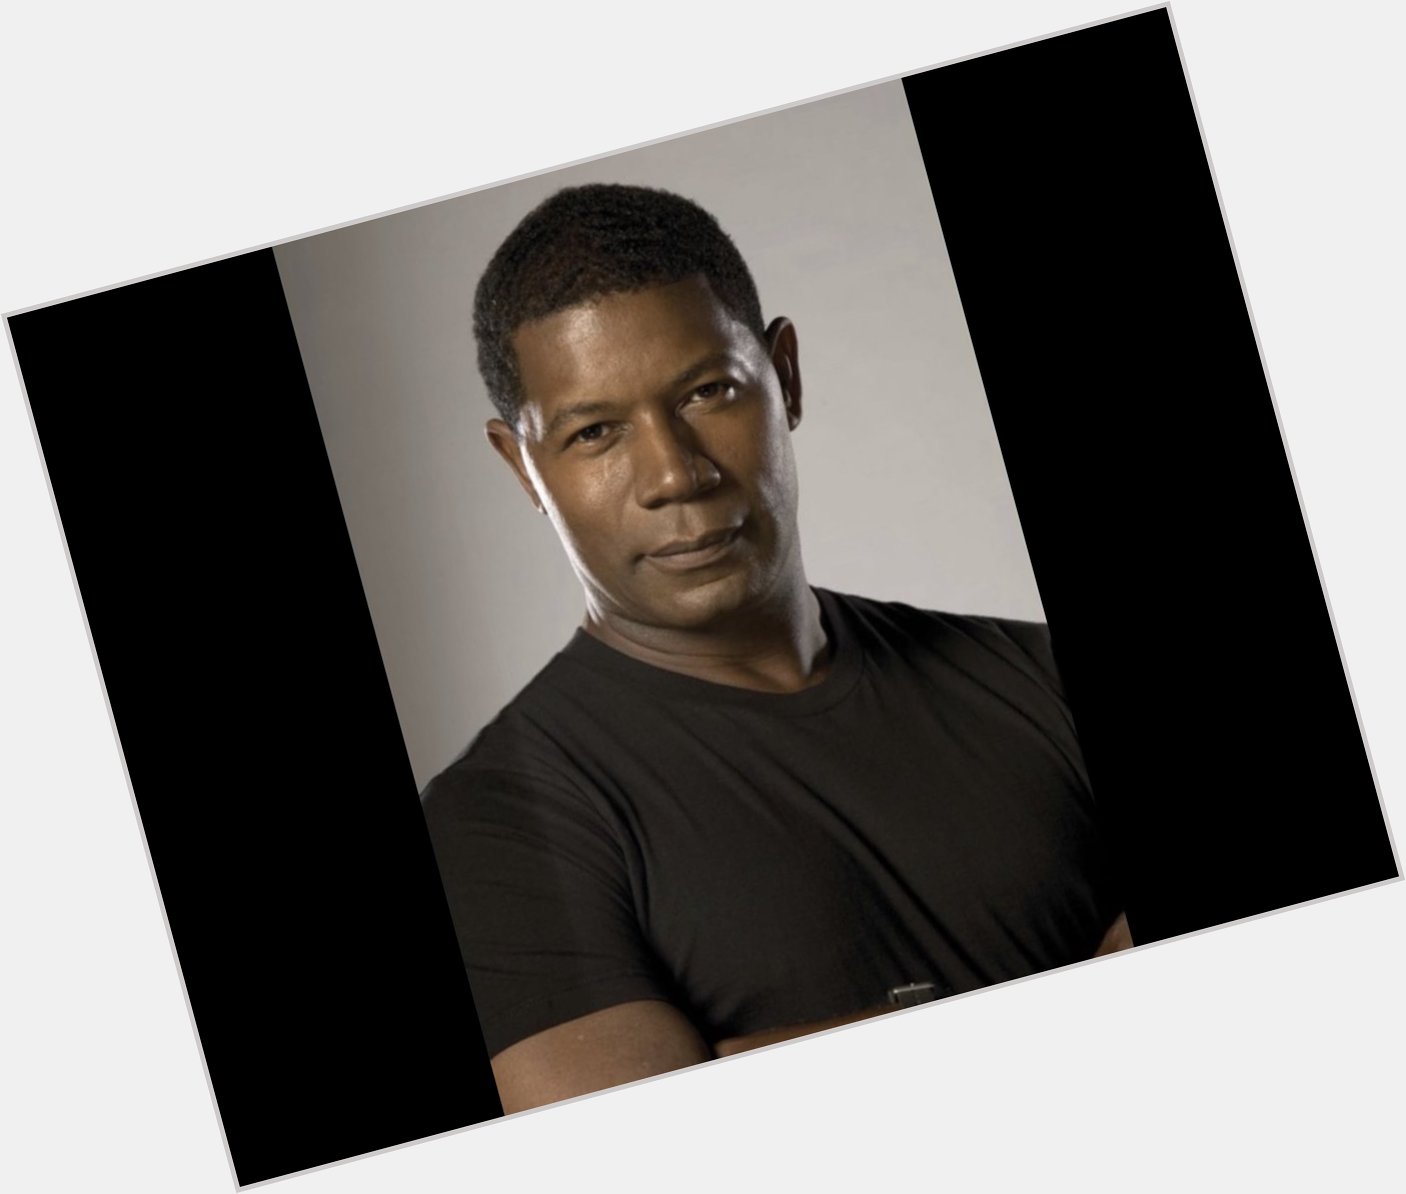 Happy Birthday 69th B-Day to actor Dennis Haysbert. Today he turns 69 years old. (Born June 1,1954). 